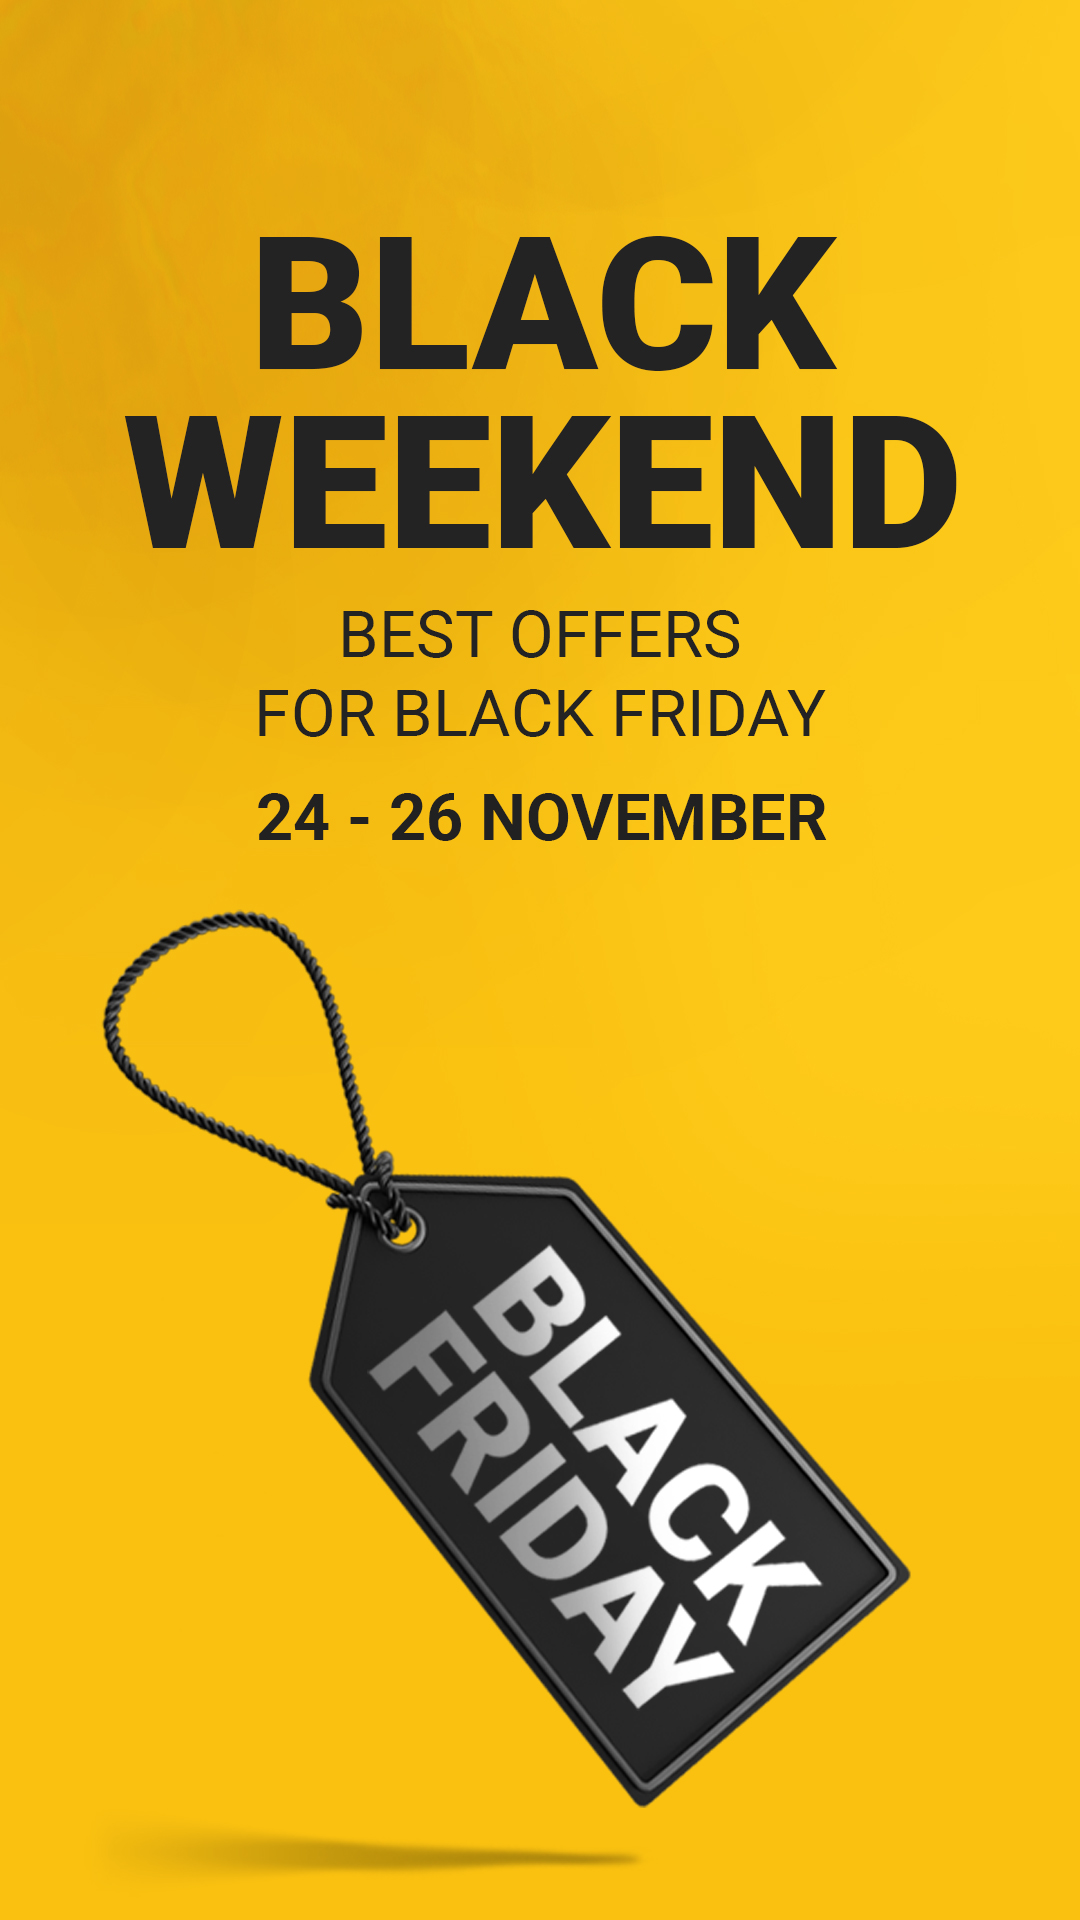 Black Friday Weekend at East Gate Mall!